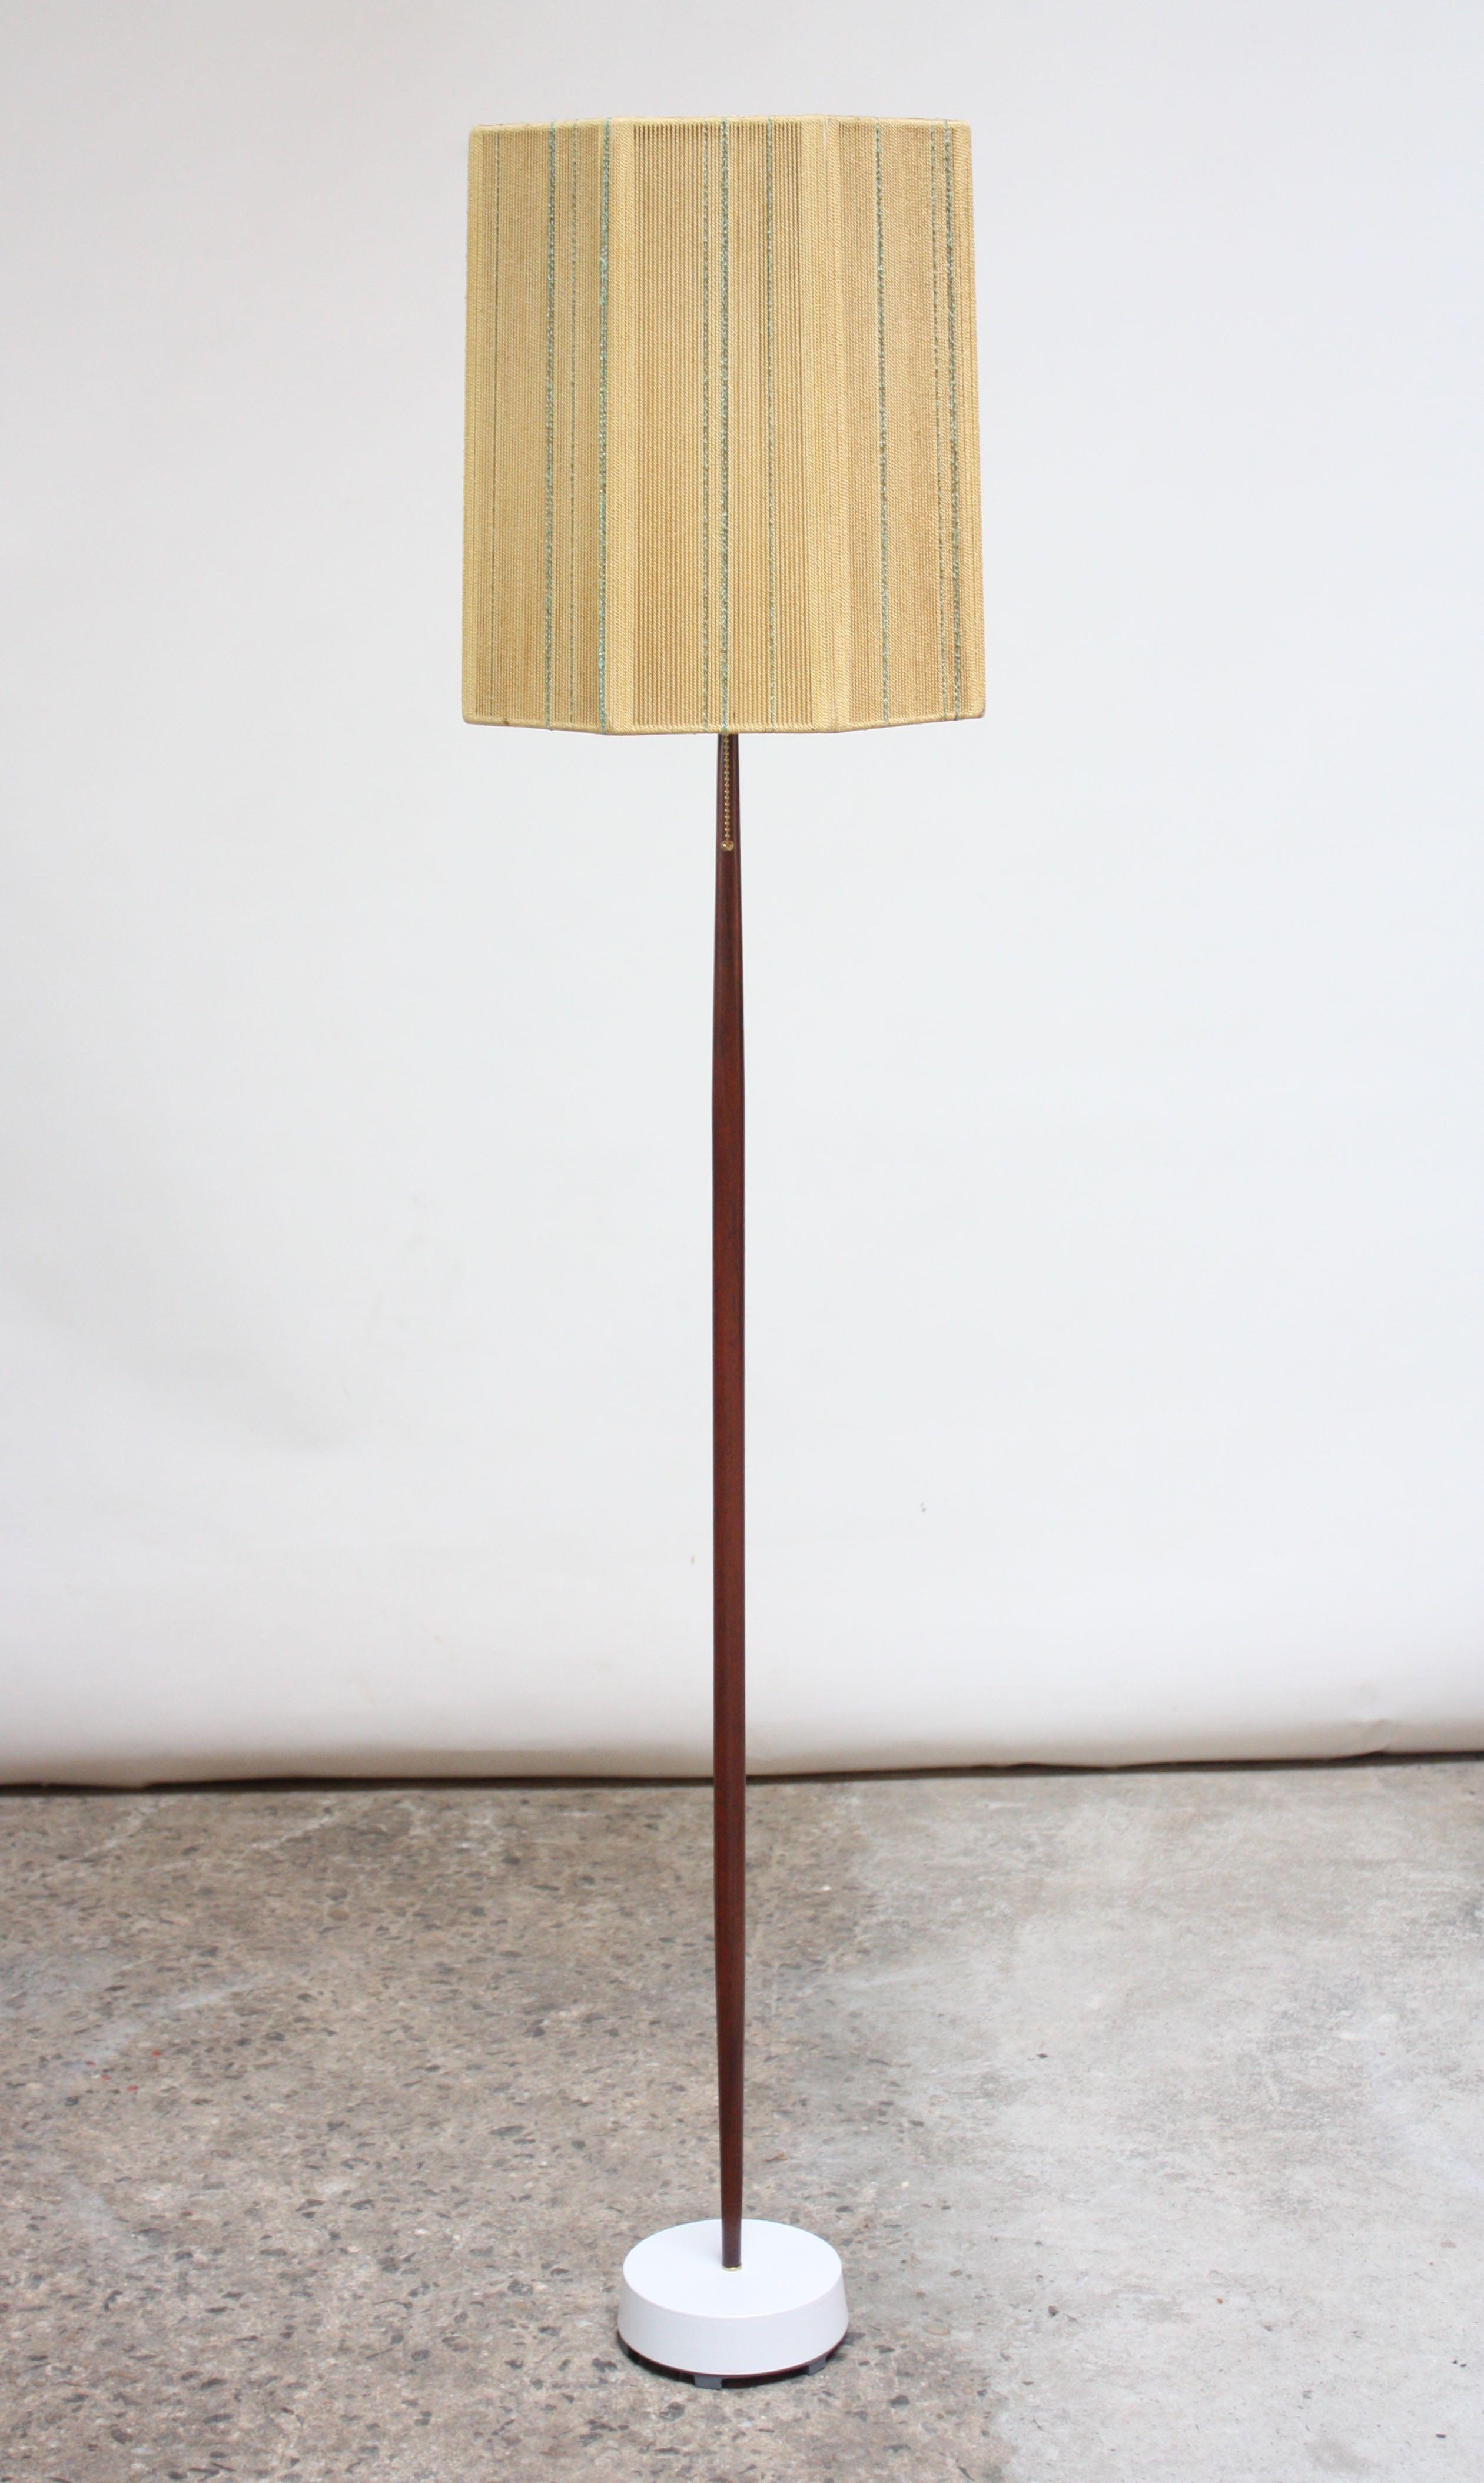 Elegant Scandinavian sculpted-teak floor lamp on painted metal base with brass accents paired with a woven rope octagonal shade in gold and blue.
Base has been restored, and teak has been refinished. All new wiring and pull string on / off switch;